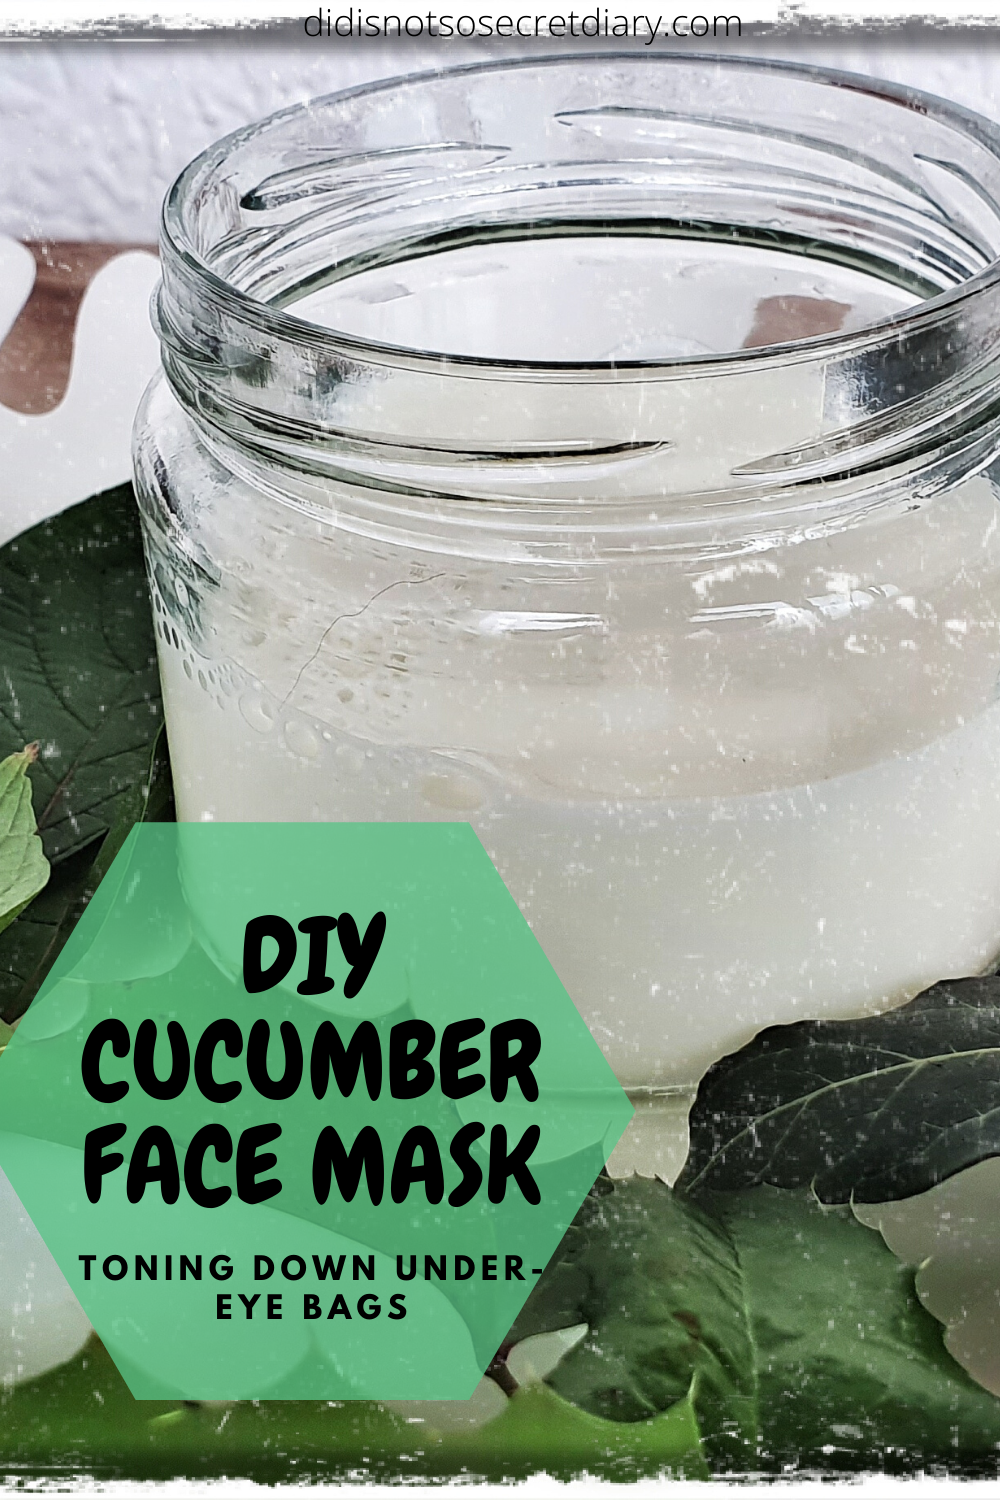 DIY Cucumber Face Mask - DIY Cucumber Face Mask -   17 diy Face Mask relaxing ideas